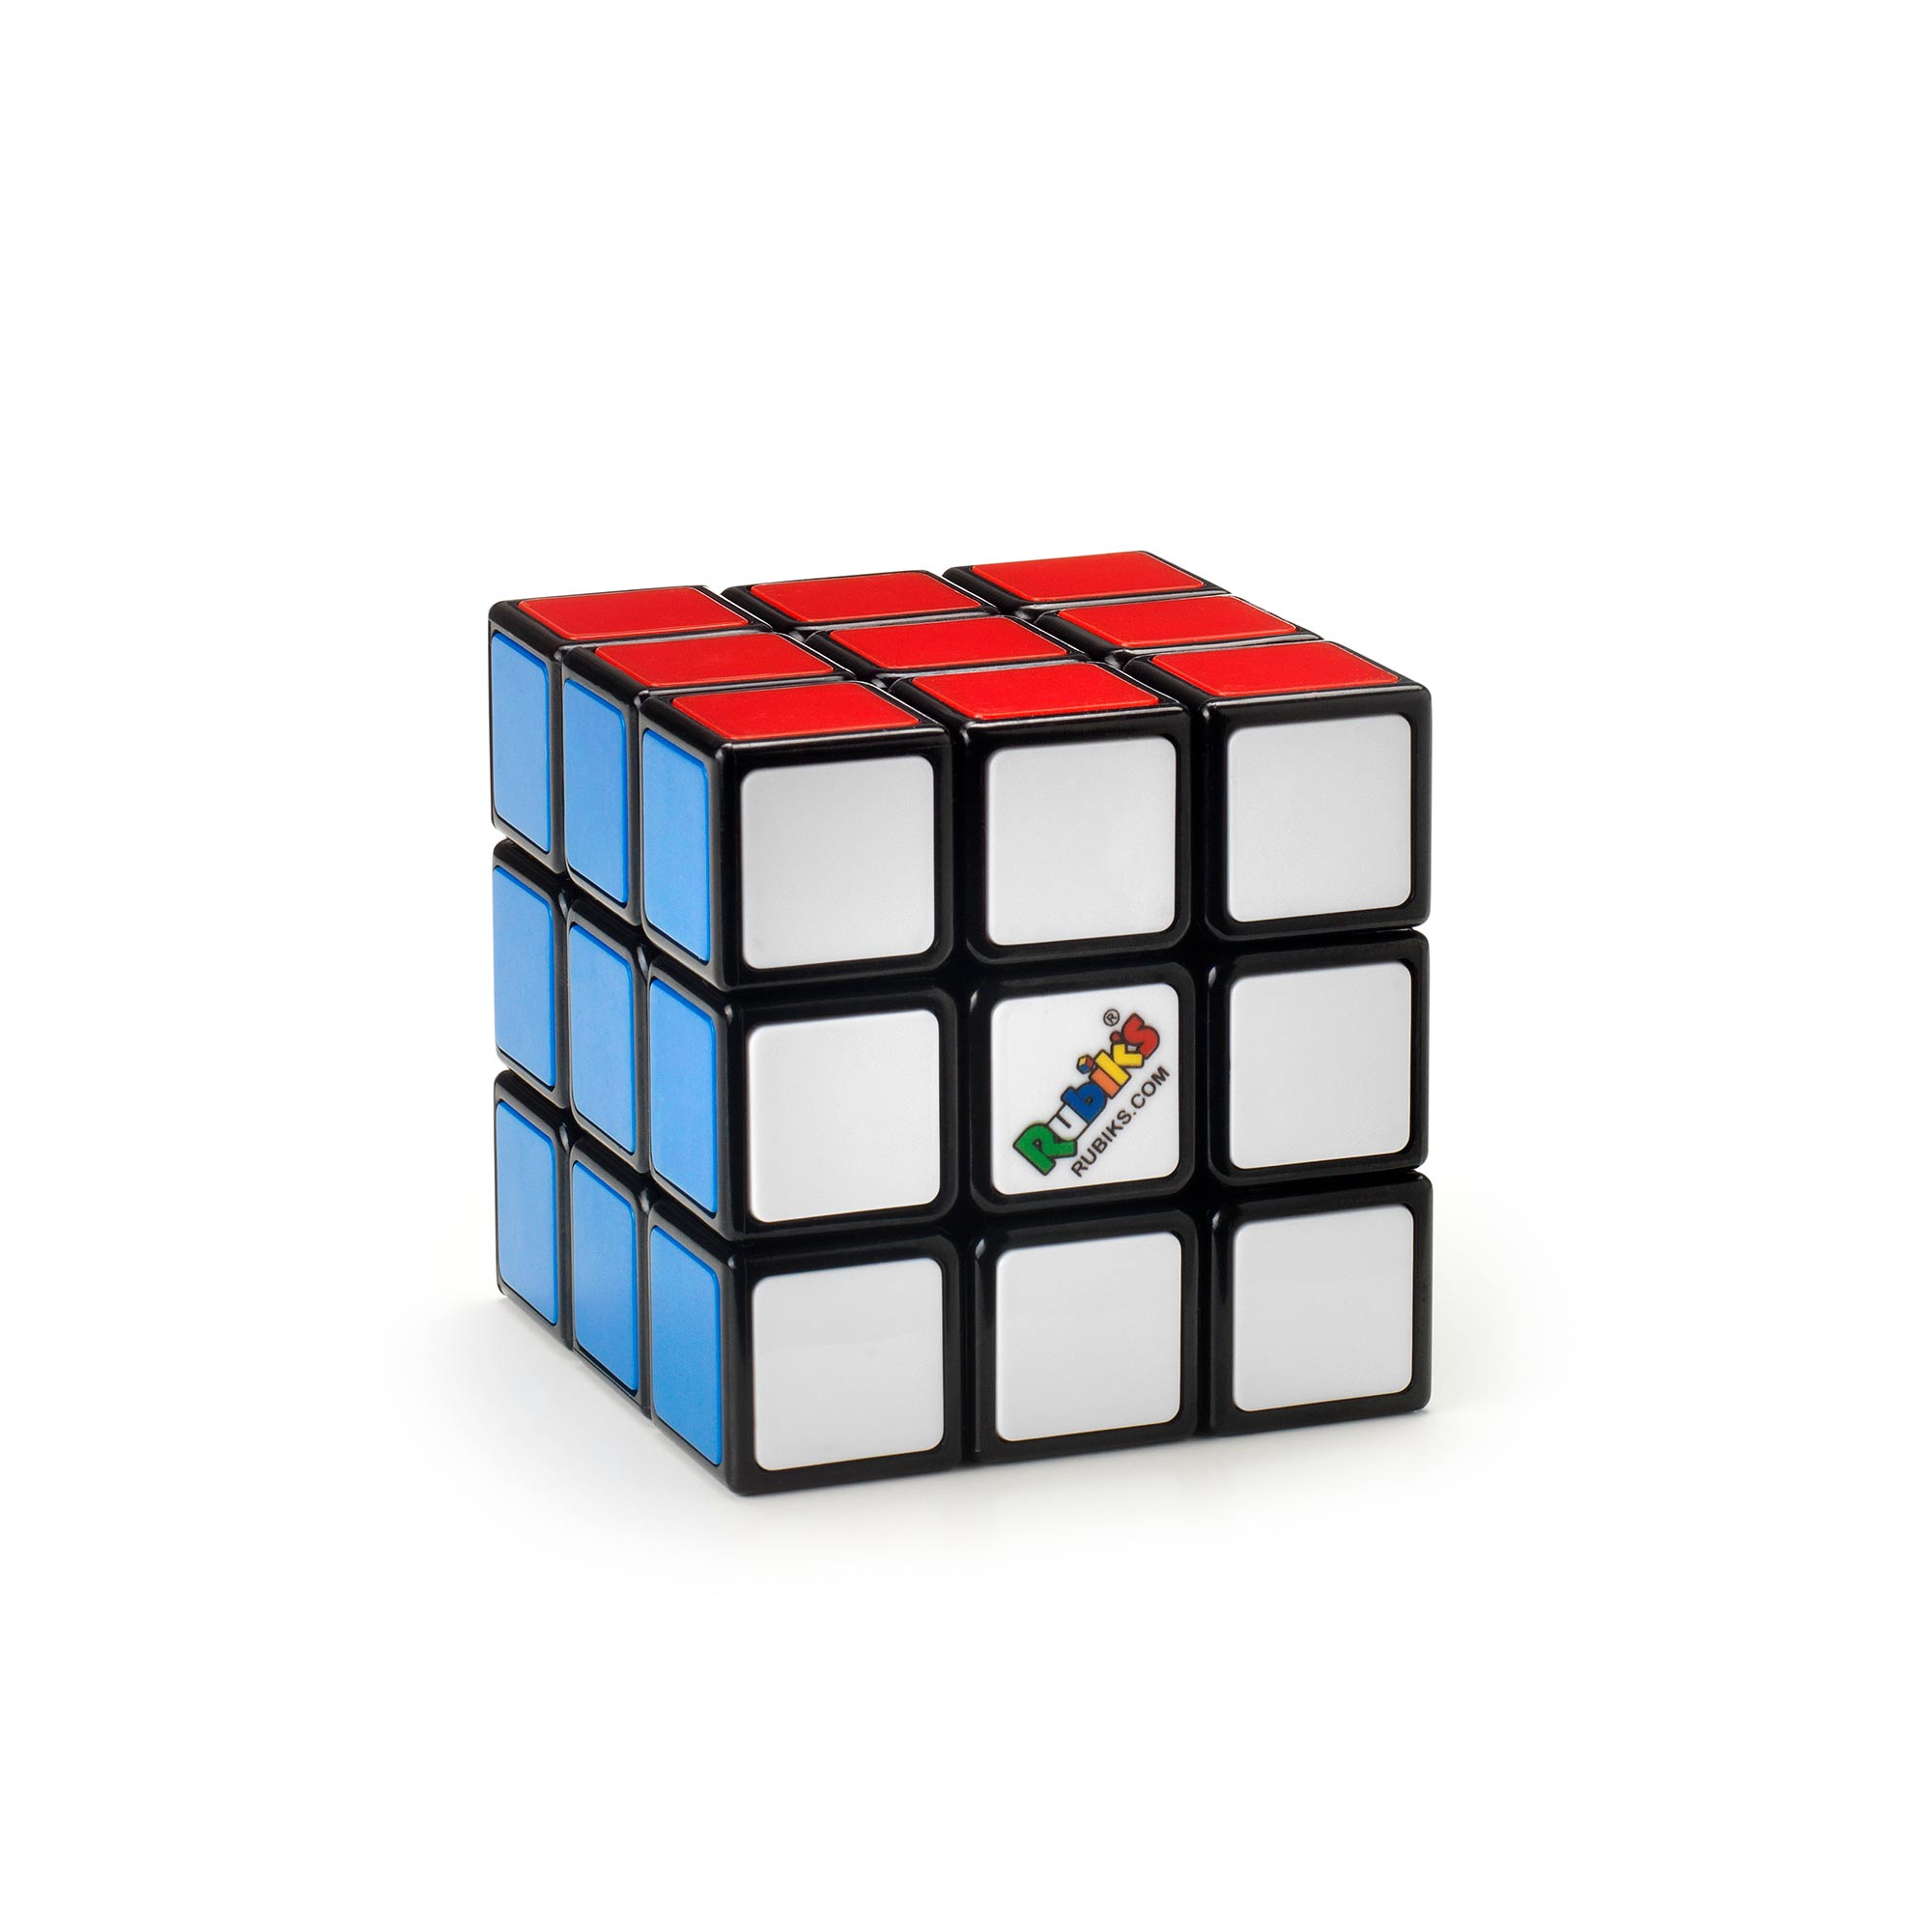 Rubik's Master, The Official 4x4 Cube Classic Color-Matching  Problem-Solving Brain Teaser Puzzle 1-Player Game Toy for Adults & Kids  Ages 8+